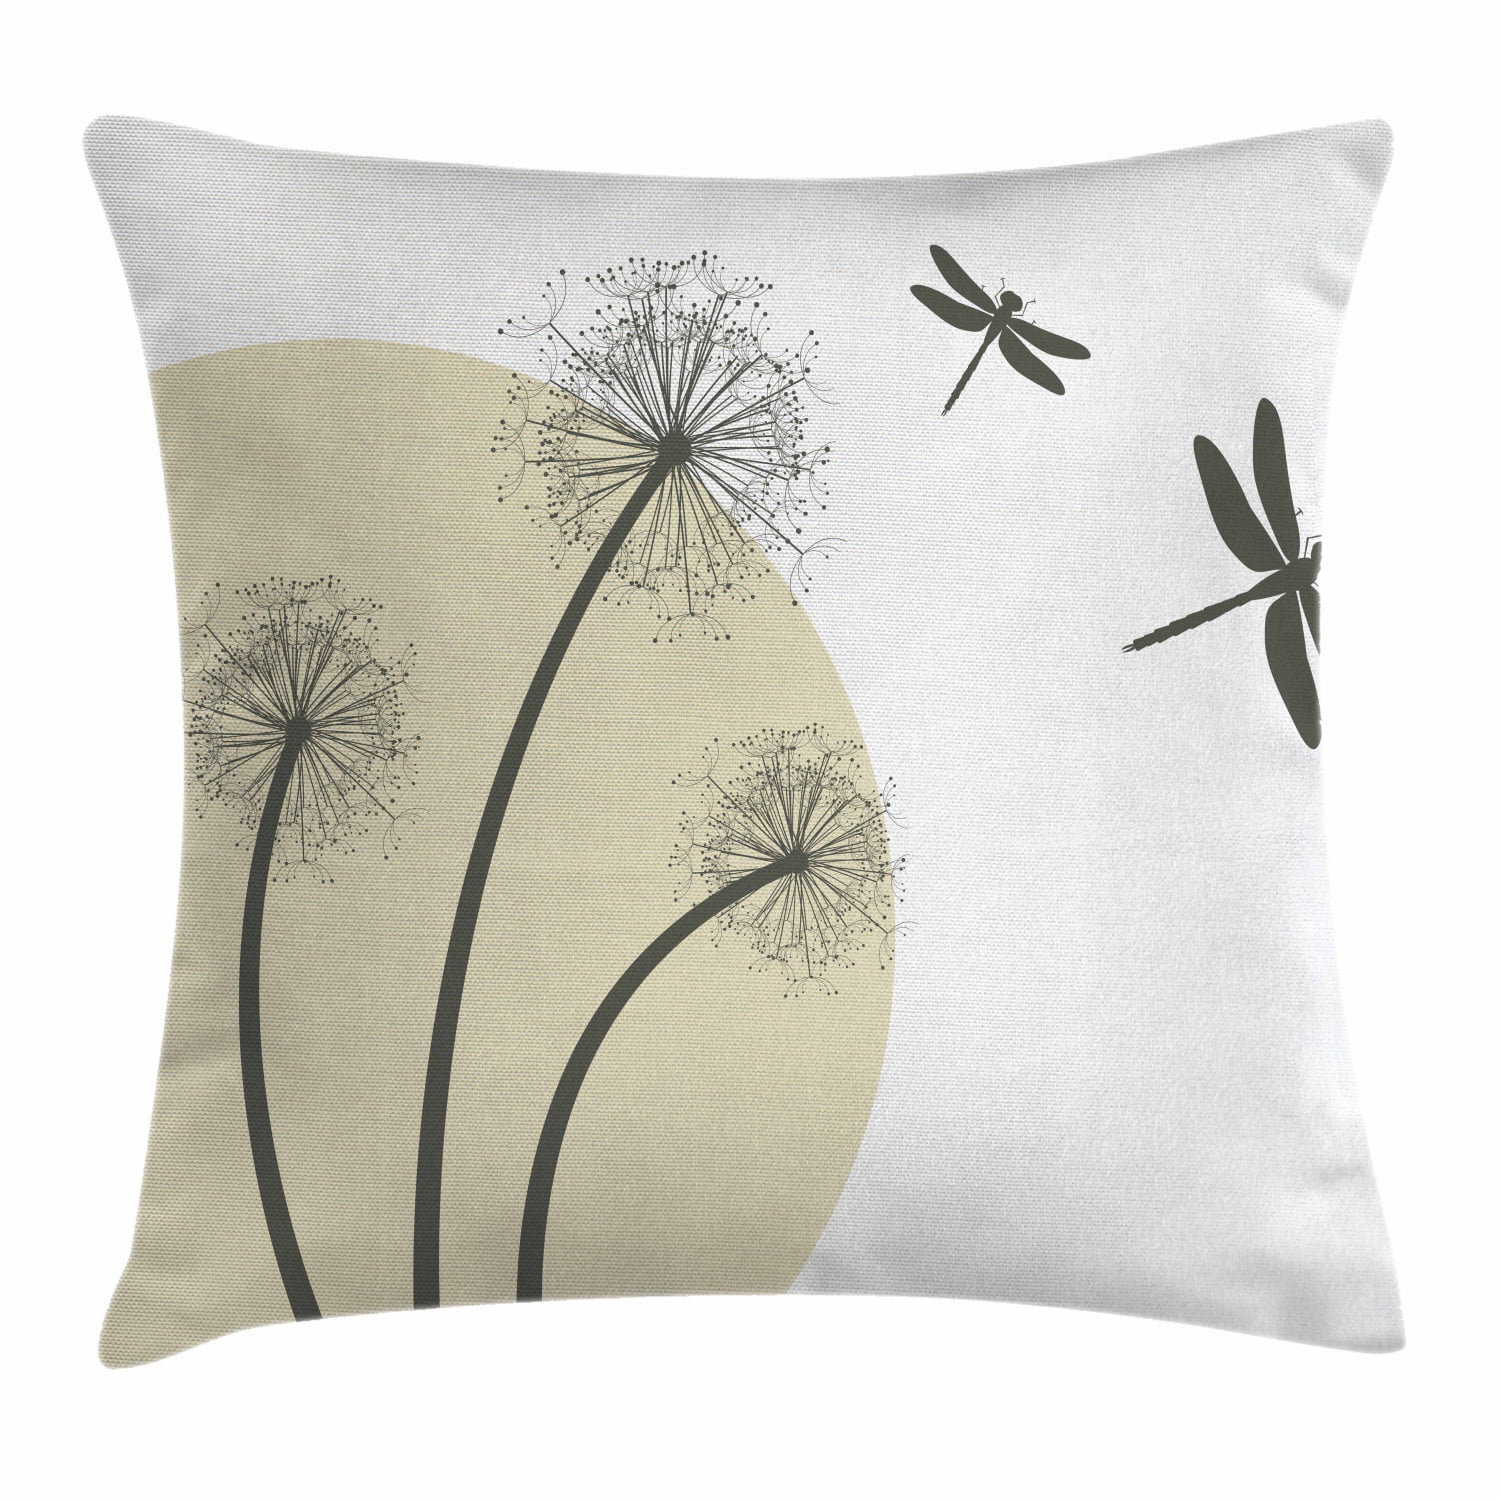 18 X 18 Seafoam Tan Ambesonne Dragonfly Throw Pillow Cushion Cover Decorative Square Accent Pillow Case Romantic Vintage Sketch in Pastel Grass Birthday Grunge Grass Botany Artwork